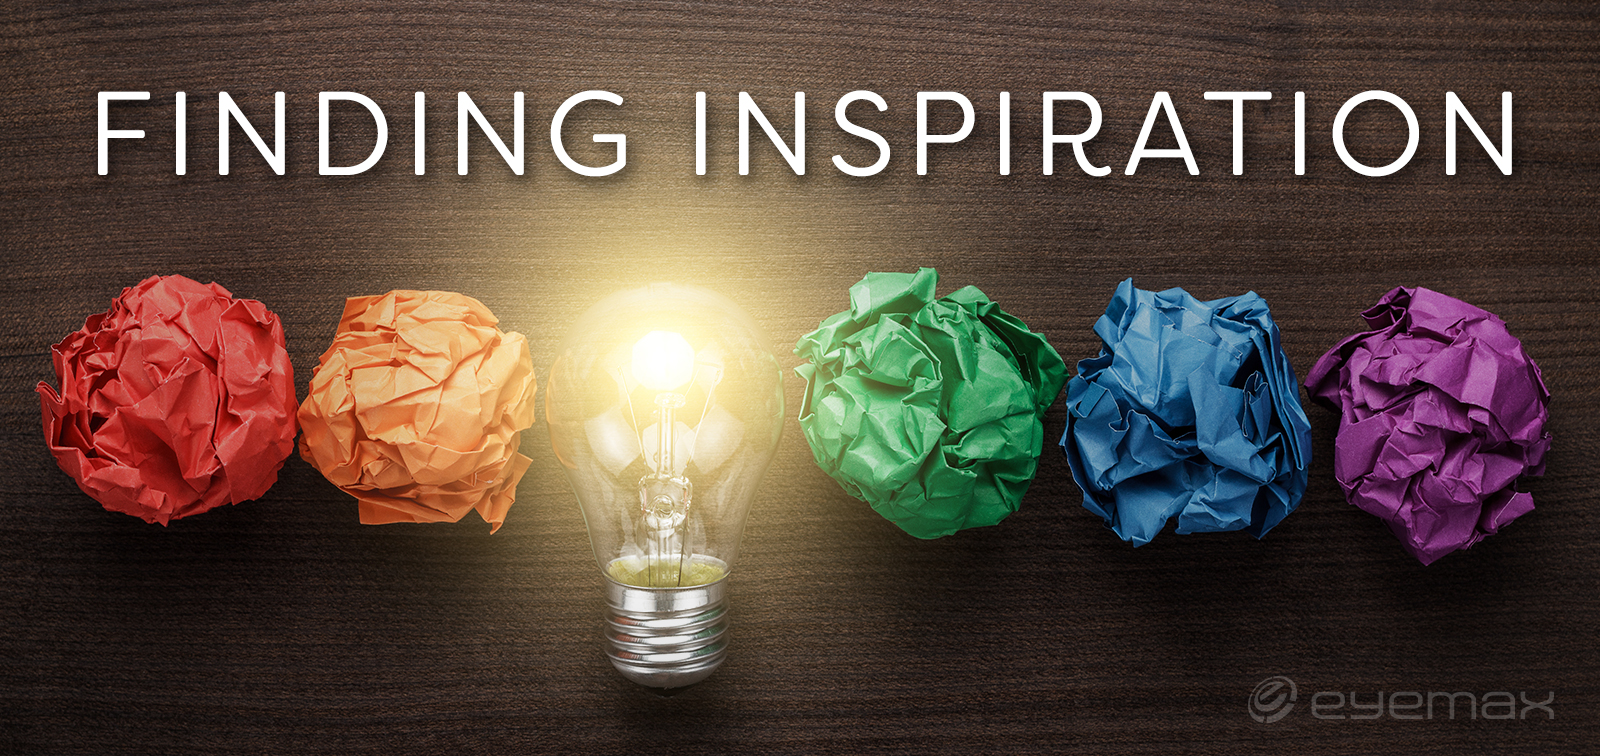 Finding Inspiration